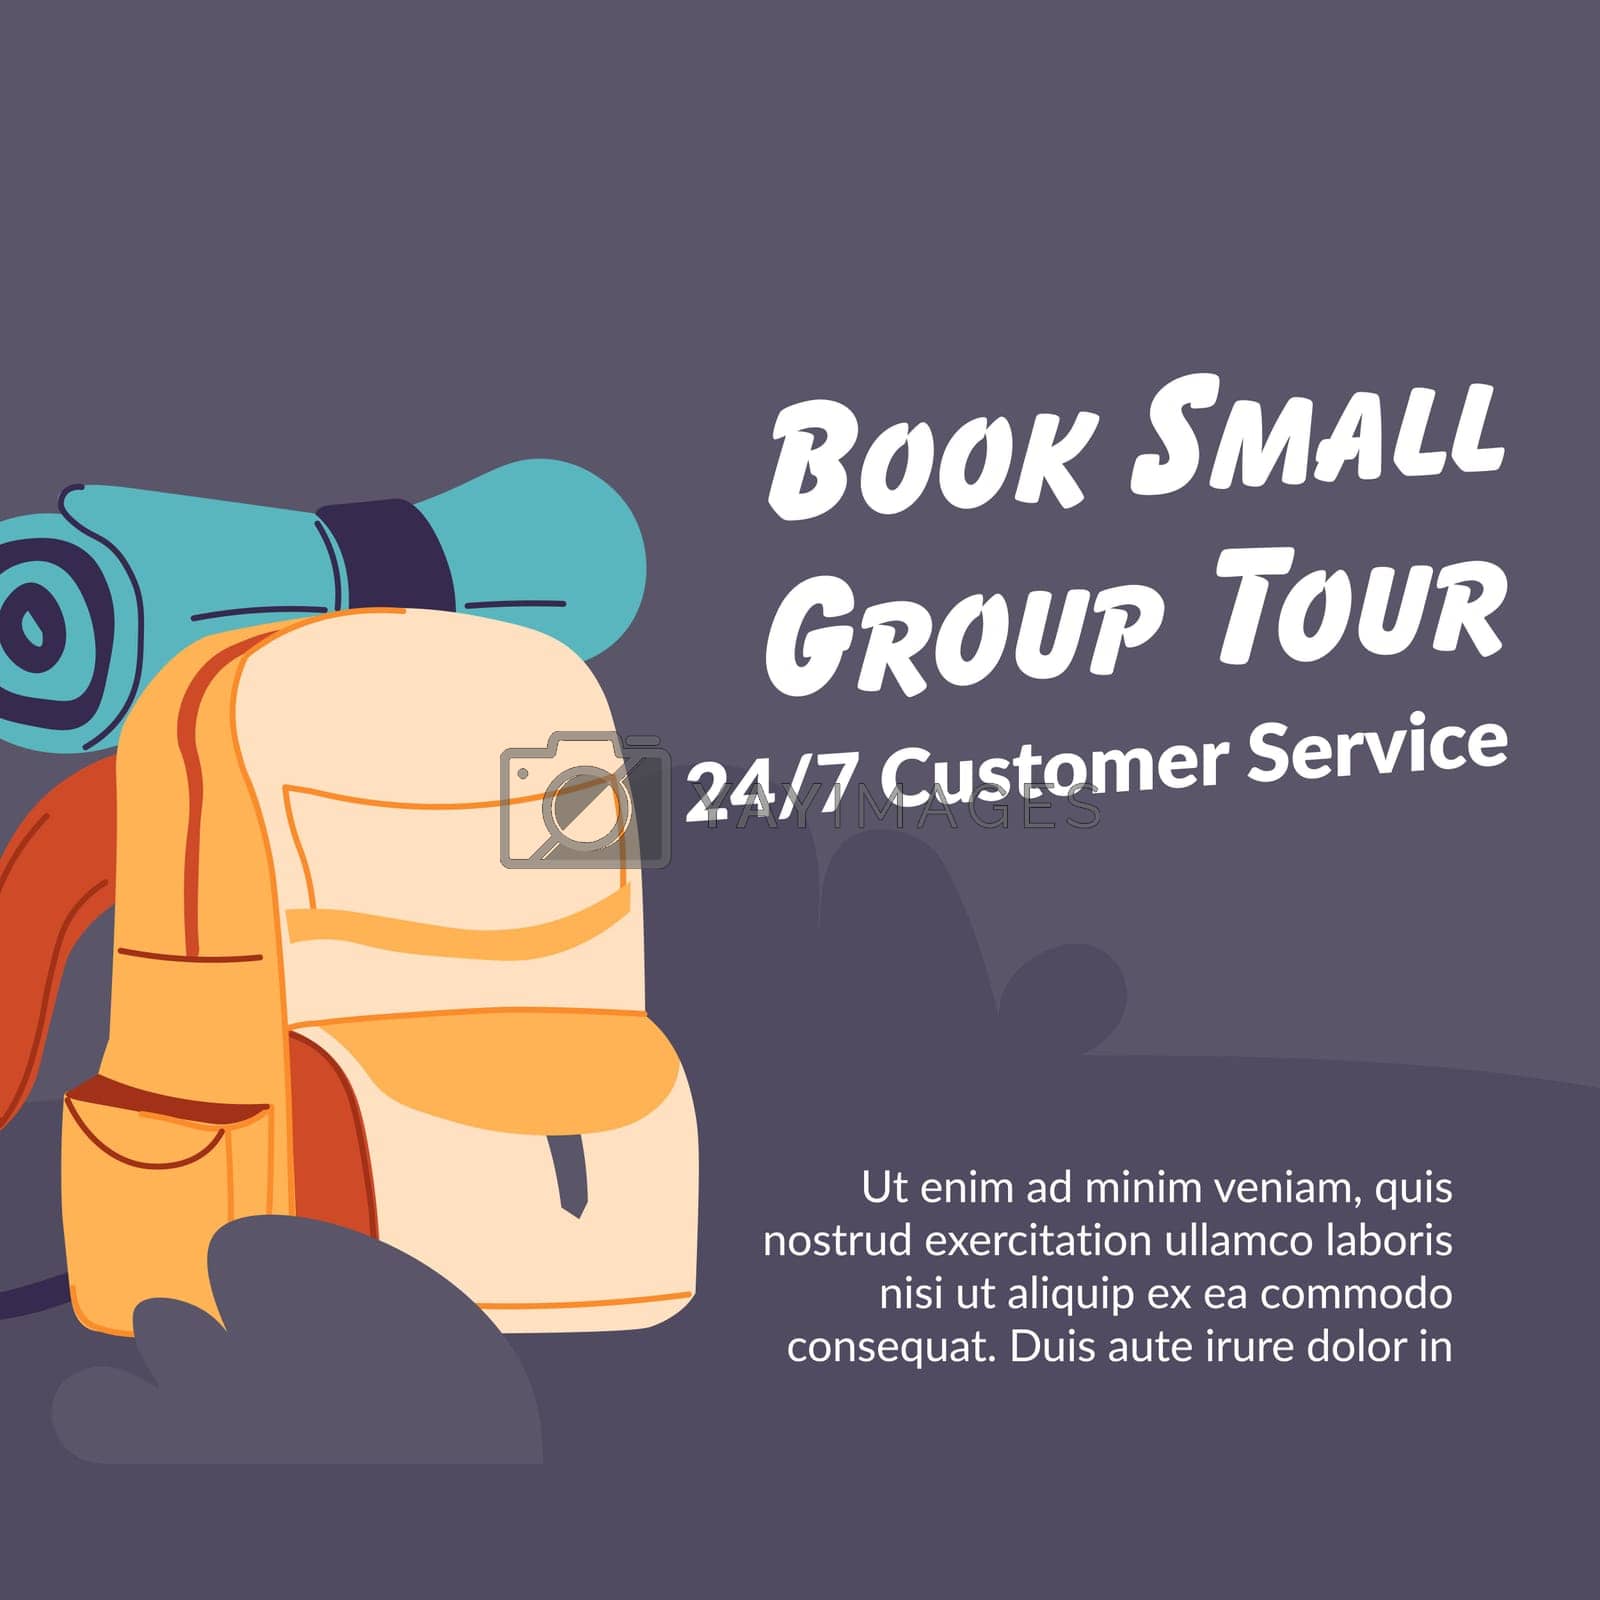 Royalty free image of Book tour for small groups, daily customer service by Sonulkaster